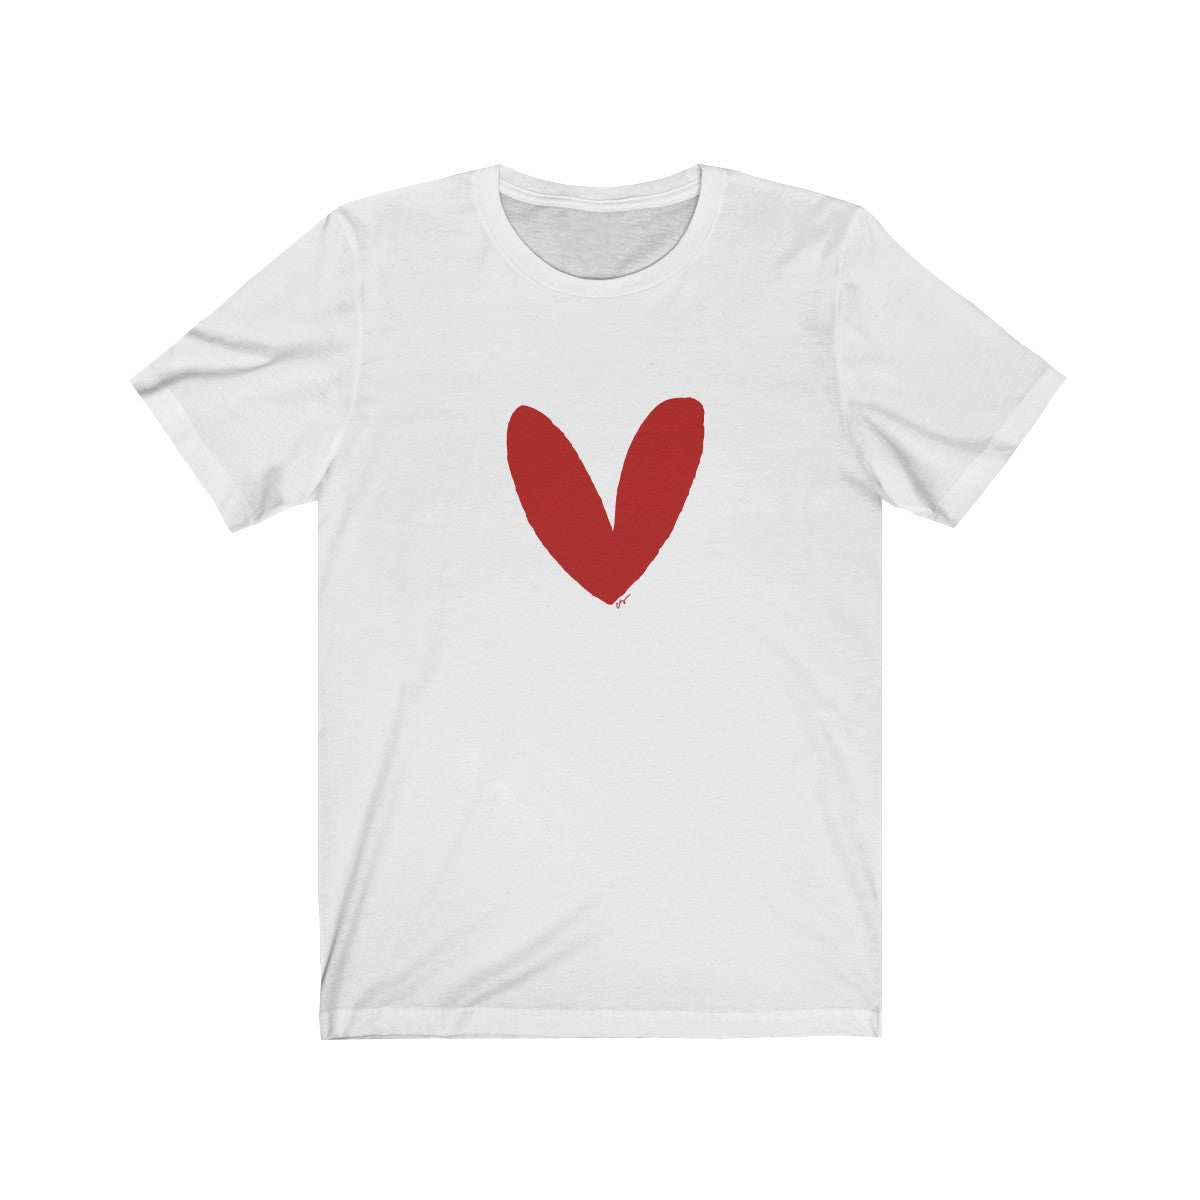 Have A Heart Adult Tee (Red Heart)